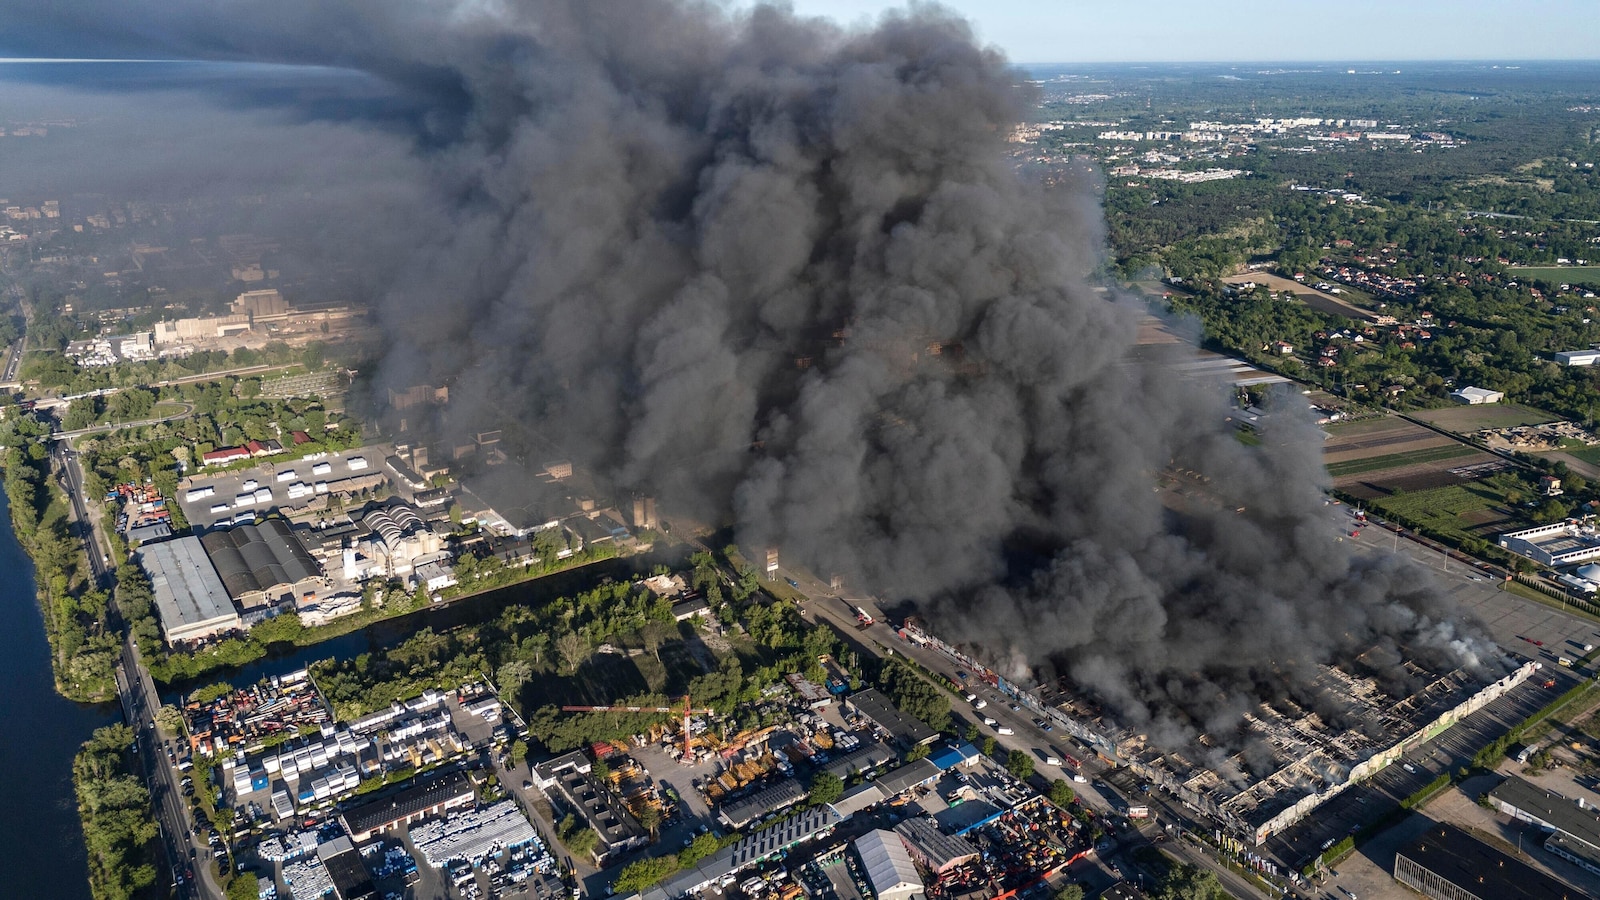 A fire burns down a shopping complex with 1,400 shops in Poland's capital